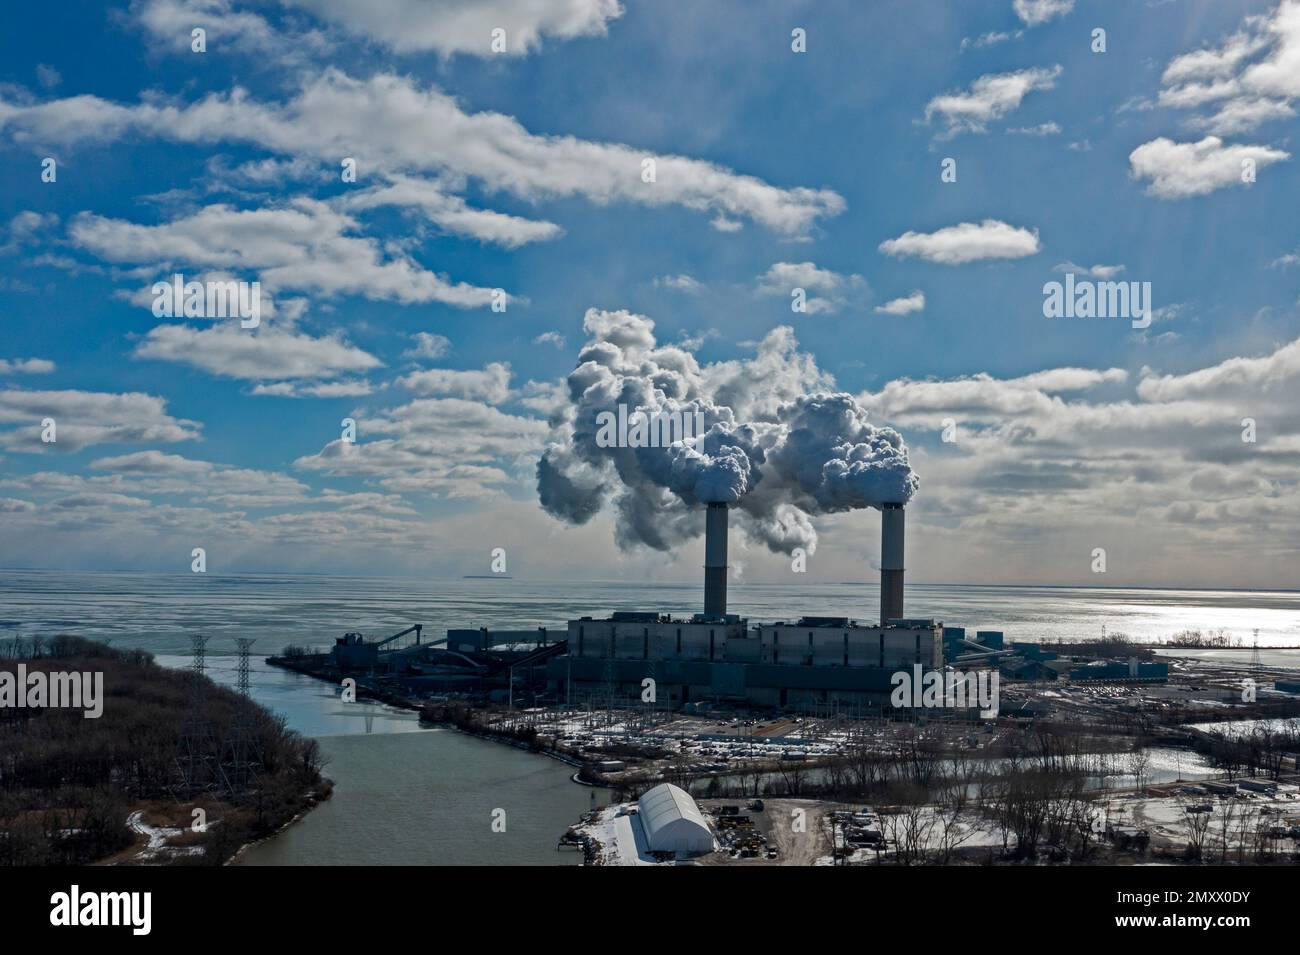 Monroe, Michigan - DTE's Energy's Monroe Power Plant on the shore of Lake Erie. The coal-fired plant is the second biggest emitter of greenhouse gases Stock Photo